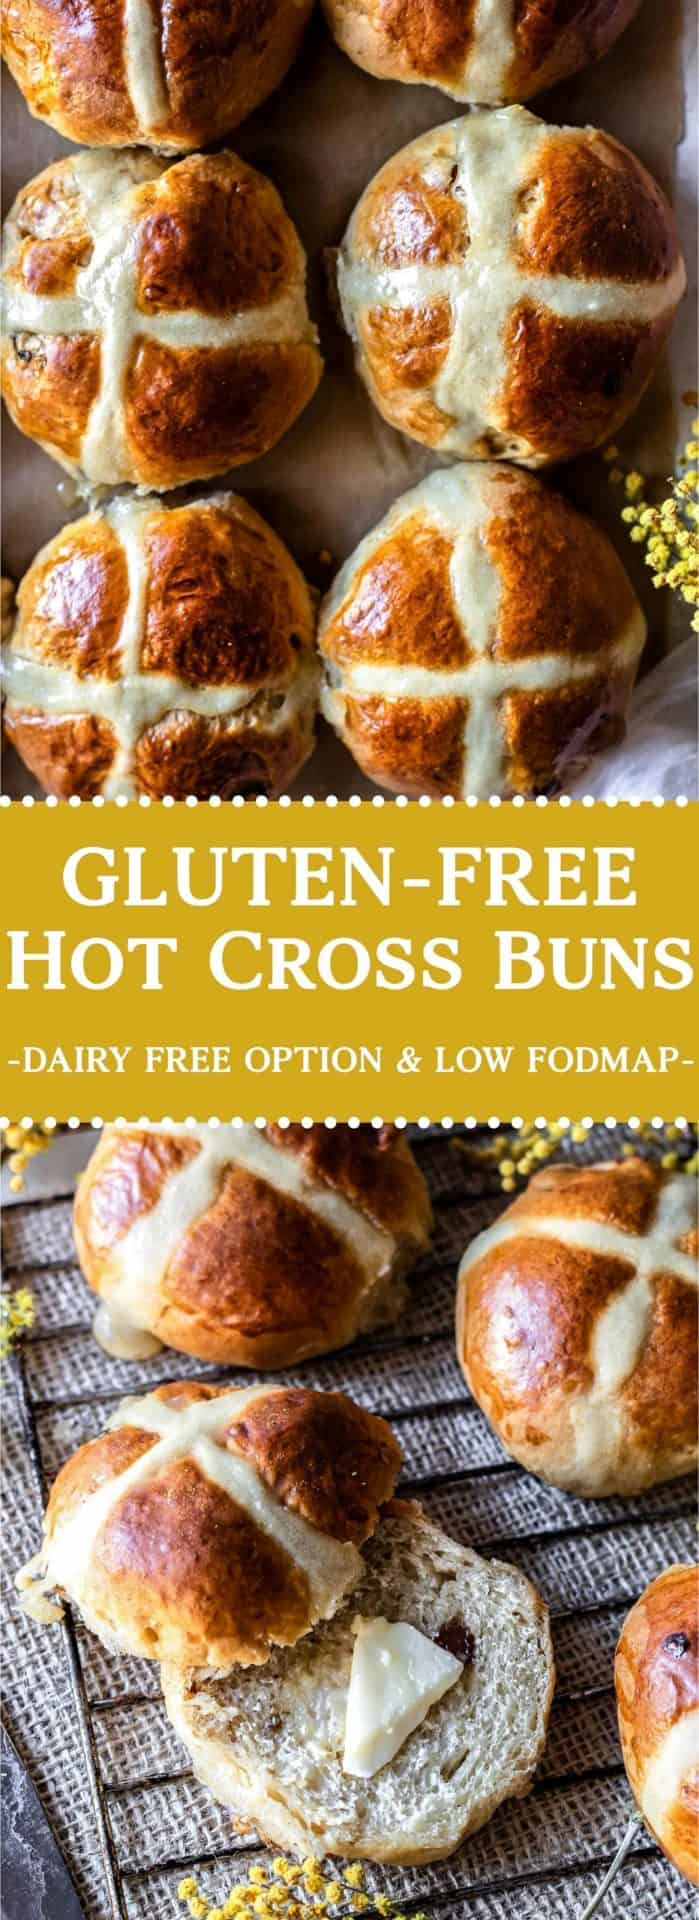 These Gluten-Free Hot Cross Buns are FODMAP friendly, very simple to make, pillowy soft, perfectly spiced, and just as delicious as the regular buns.
